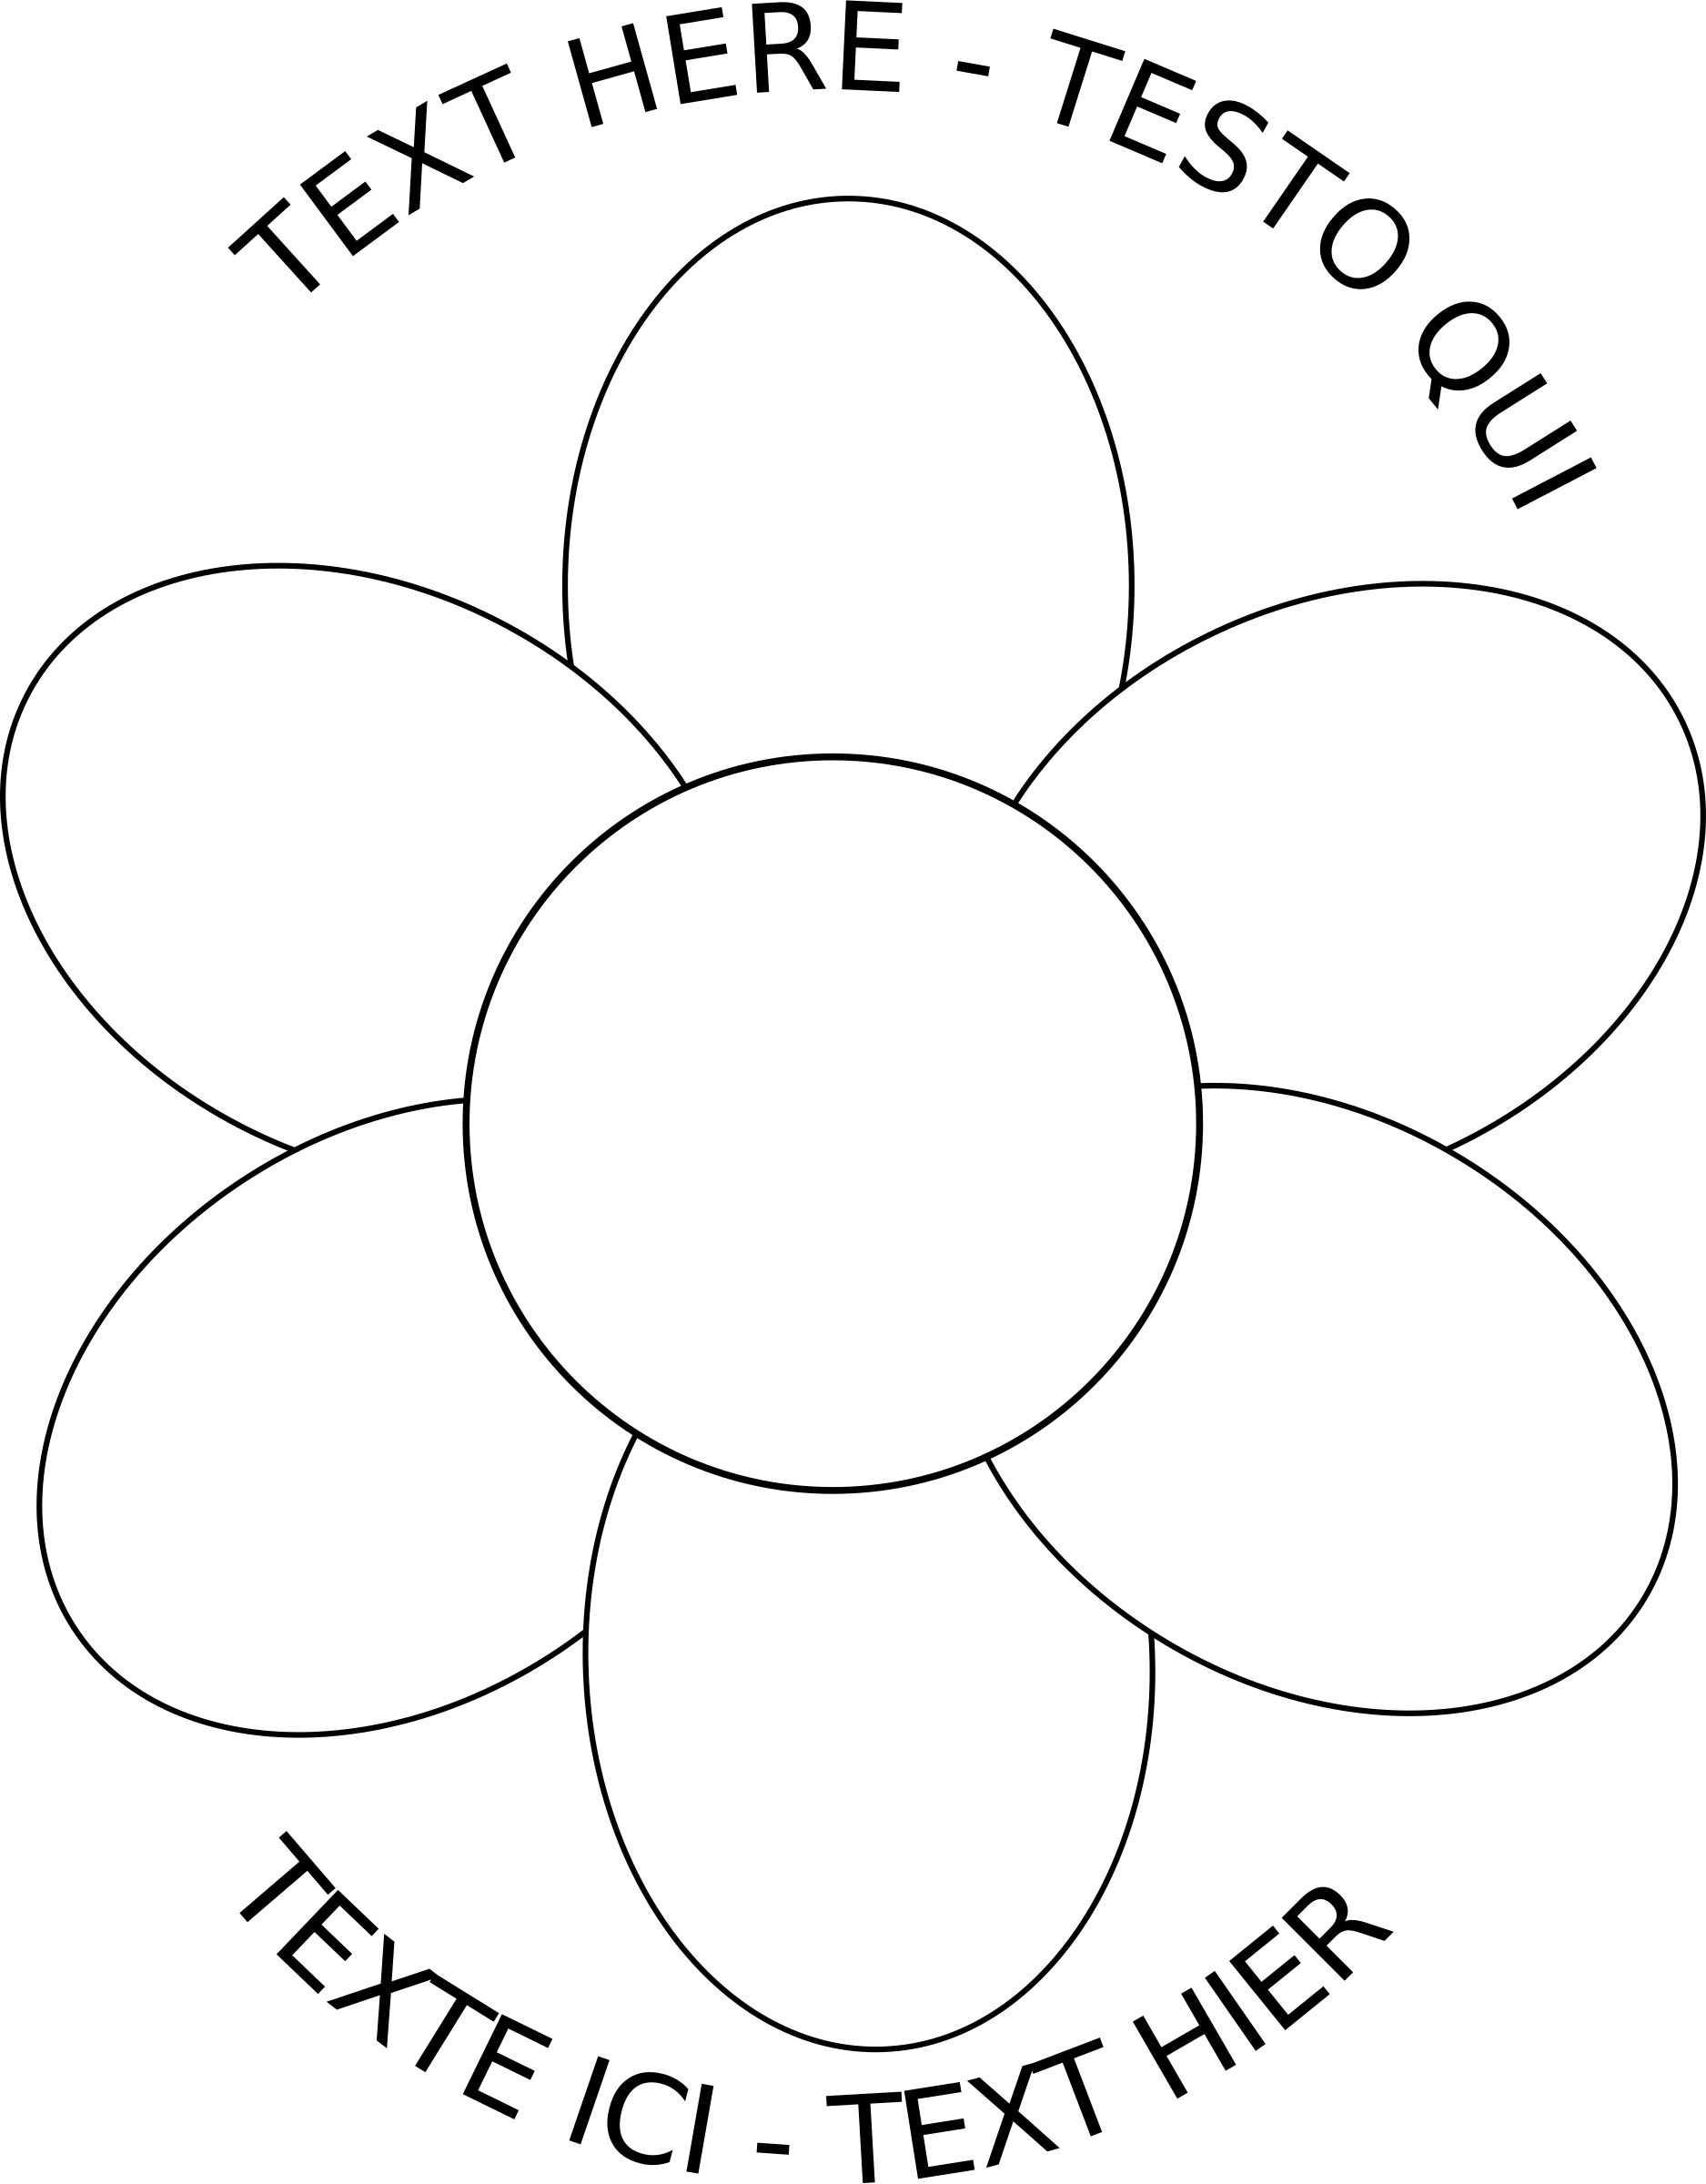 Flower With 7 Petals (1875x2400)